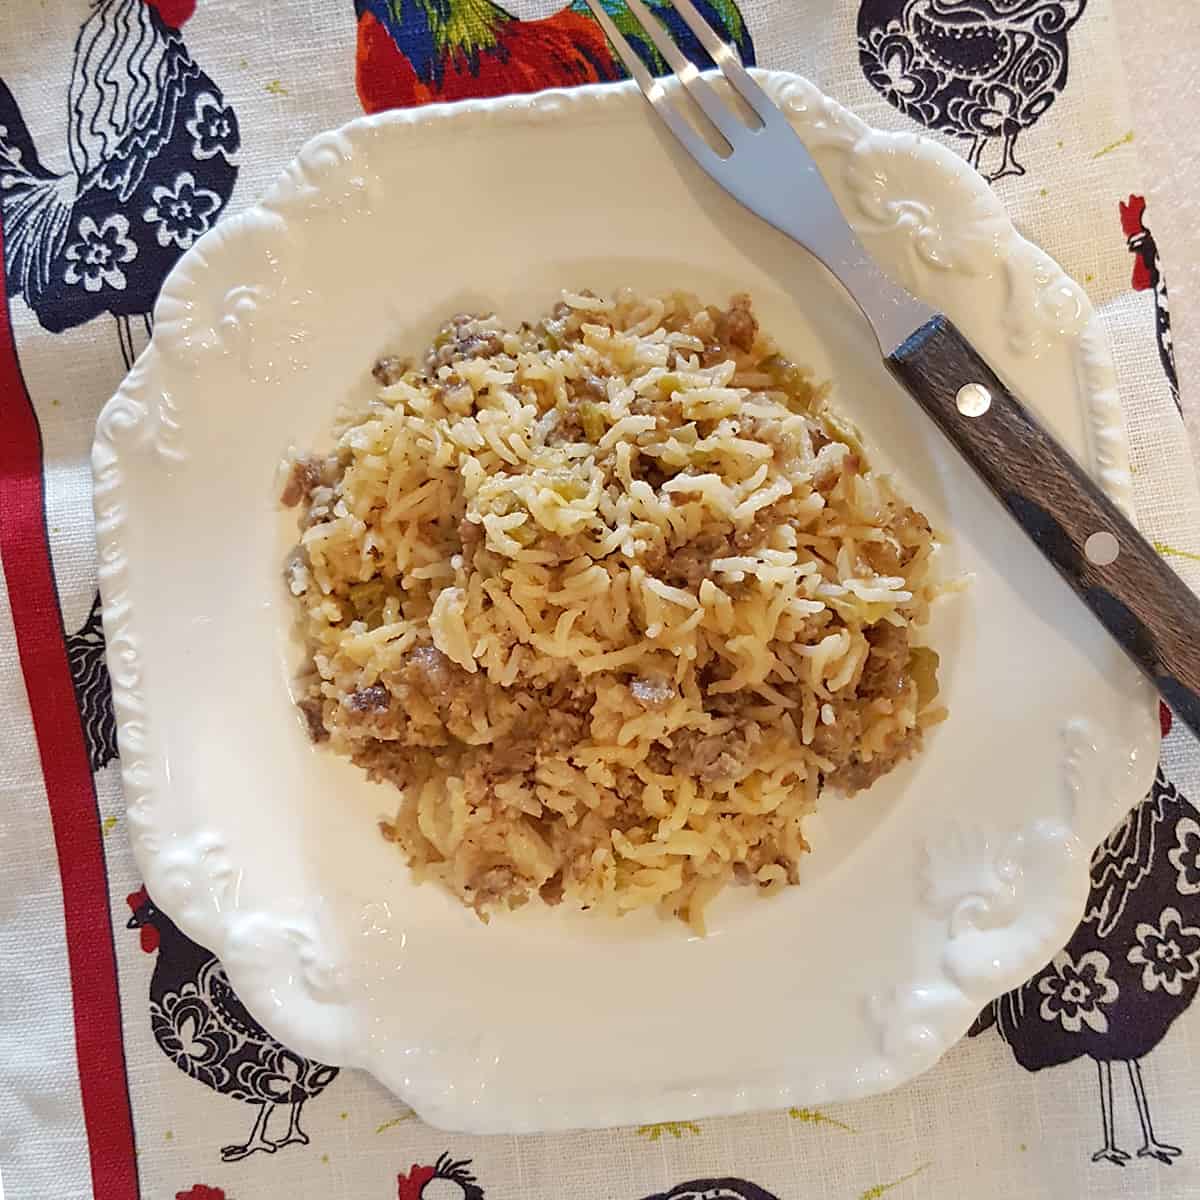 A serving of sausage rice casserole on a white plate.